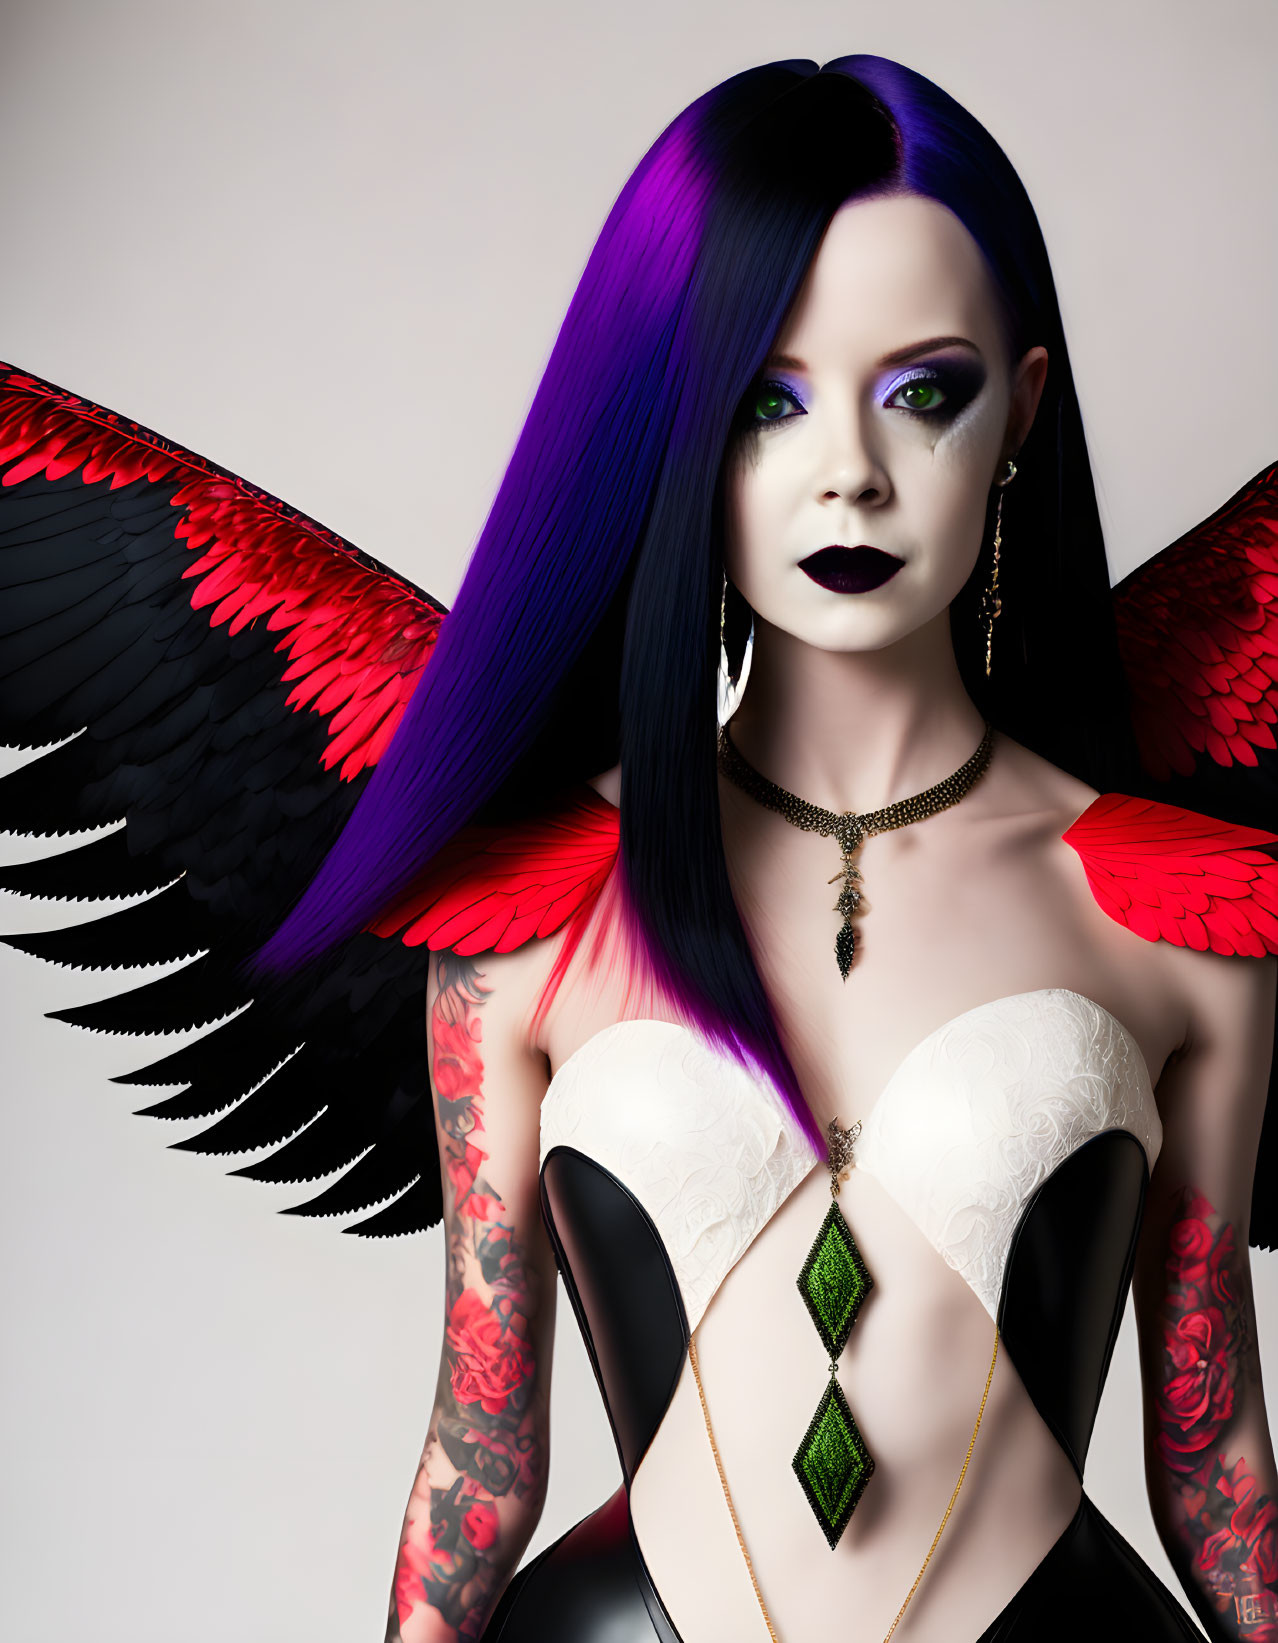 Person with Purple and Black Hair, Dramatic Makeup, Tattoos, Dark Angel Wings, White Top